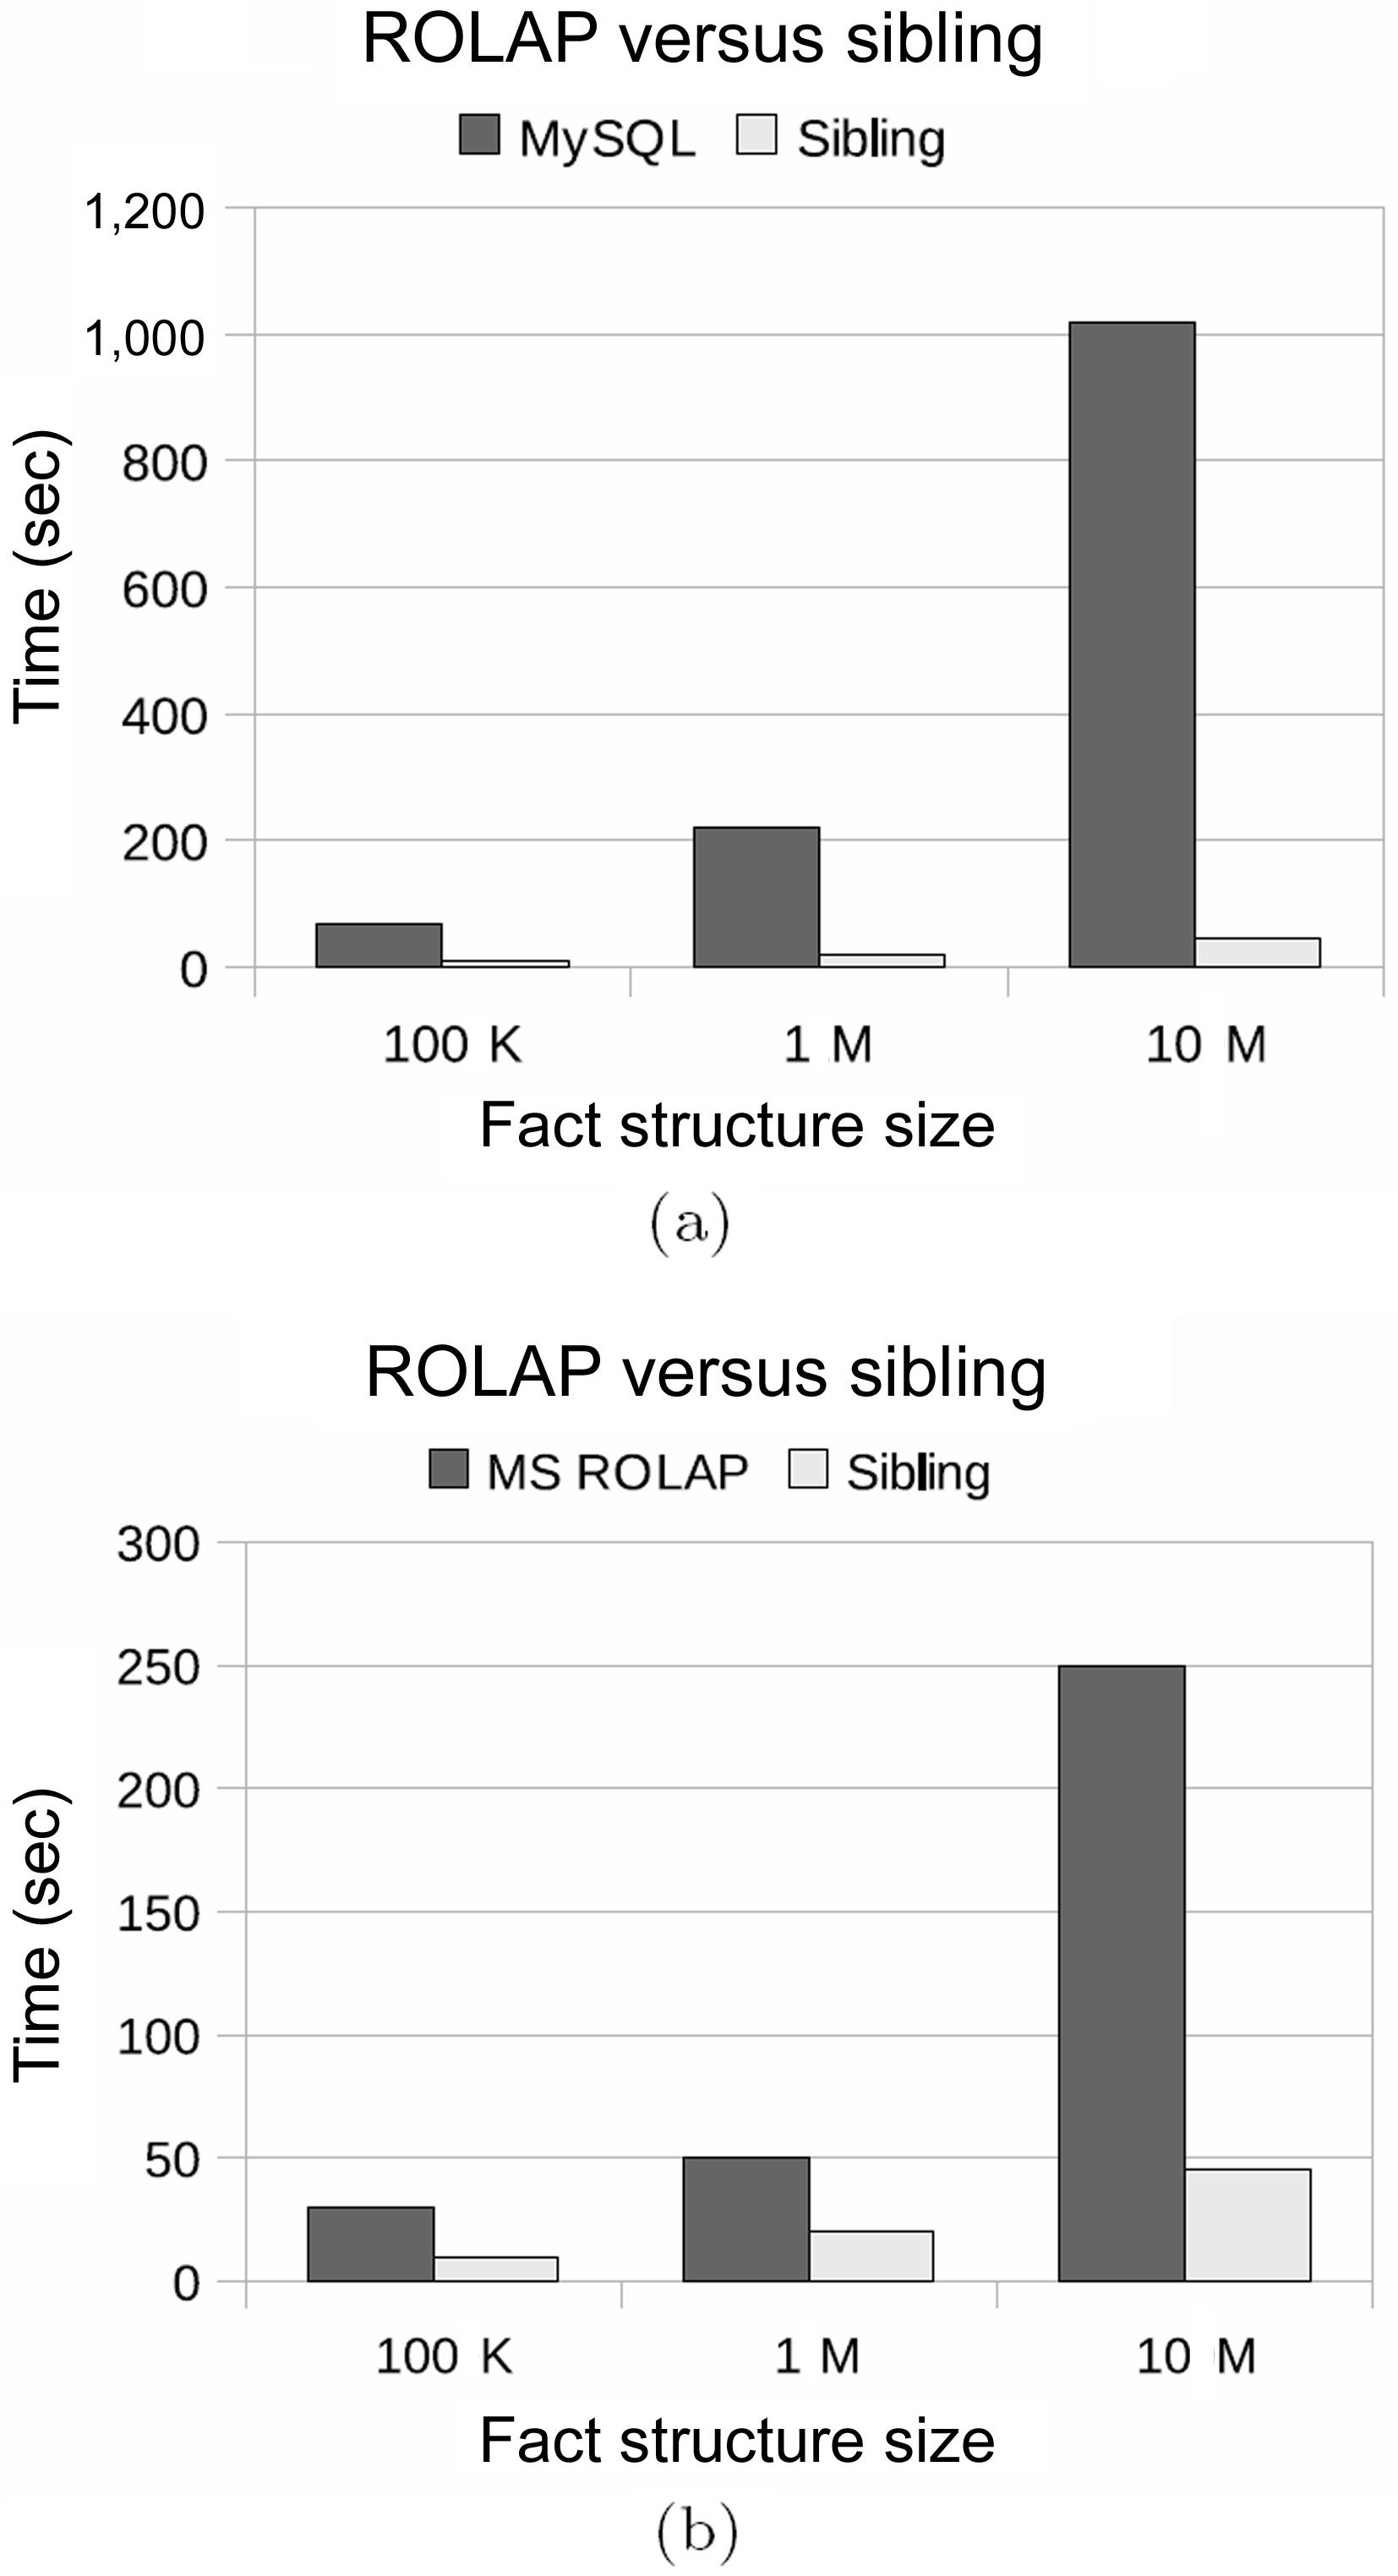 Single "sibling" server versus (a) MySQL, (b) Microsoft Analysis Services (relational online analytical process, ROLAP).